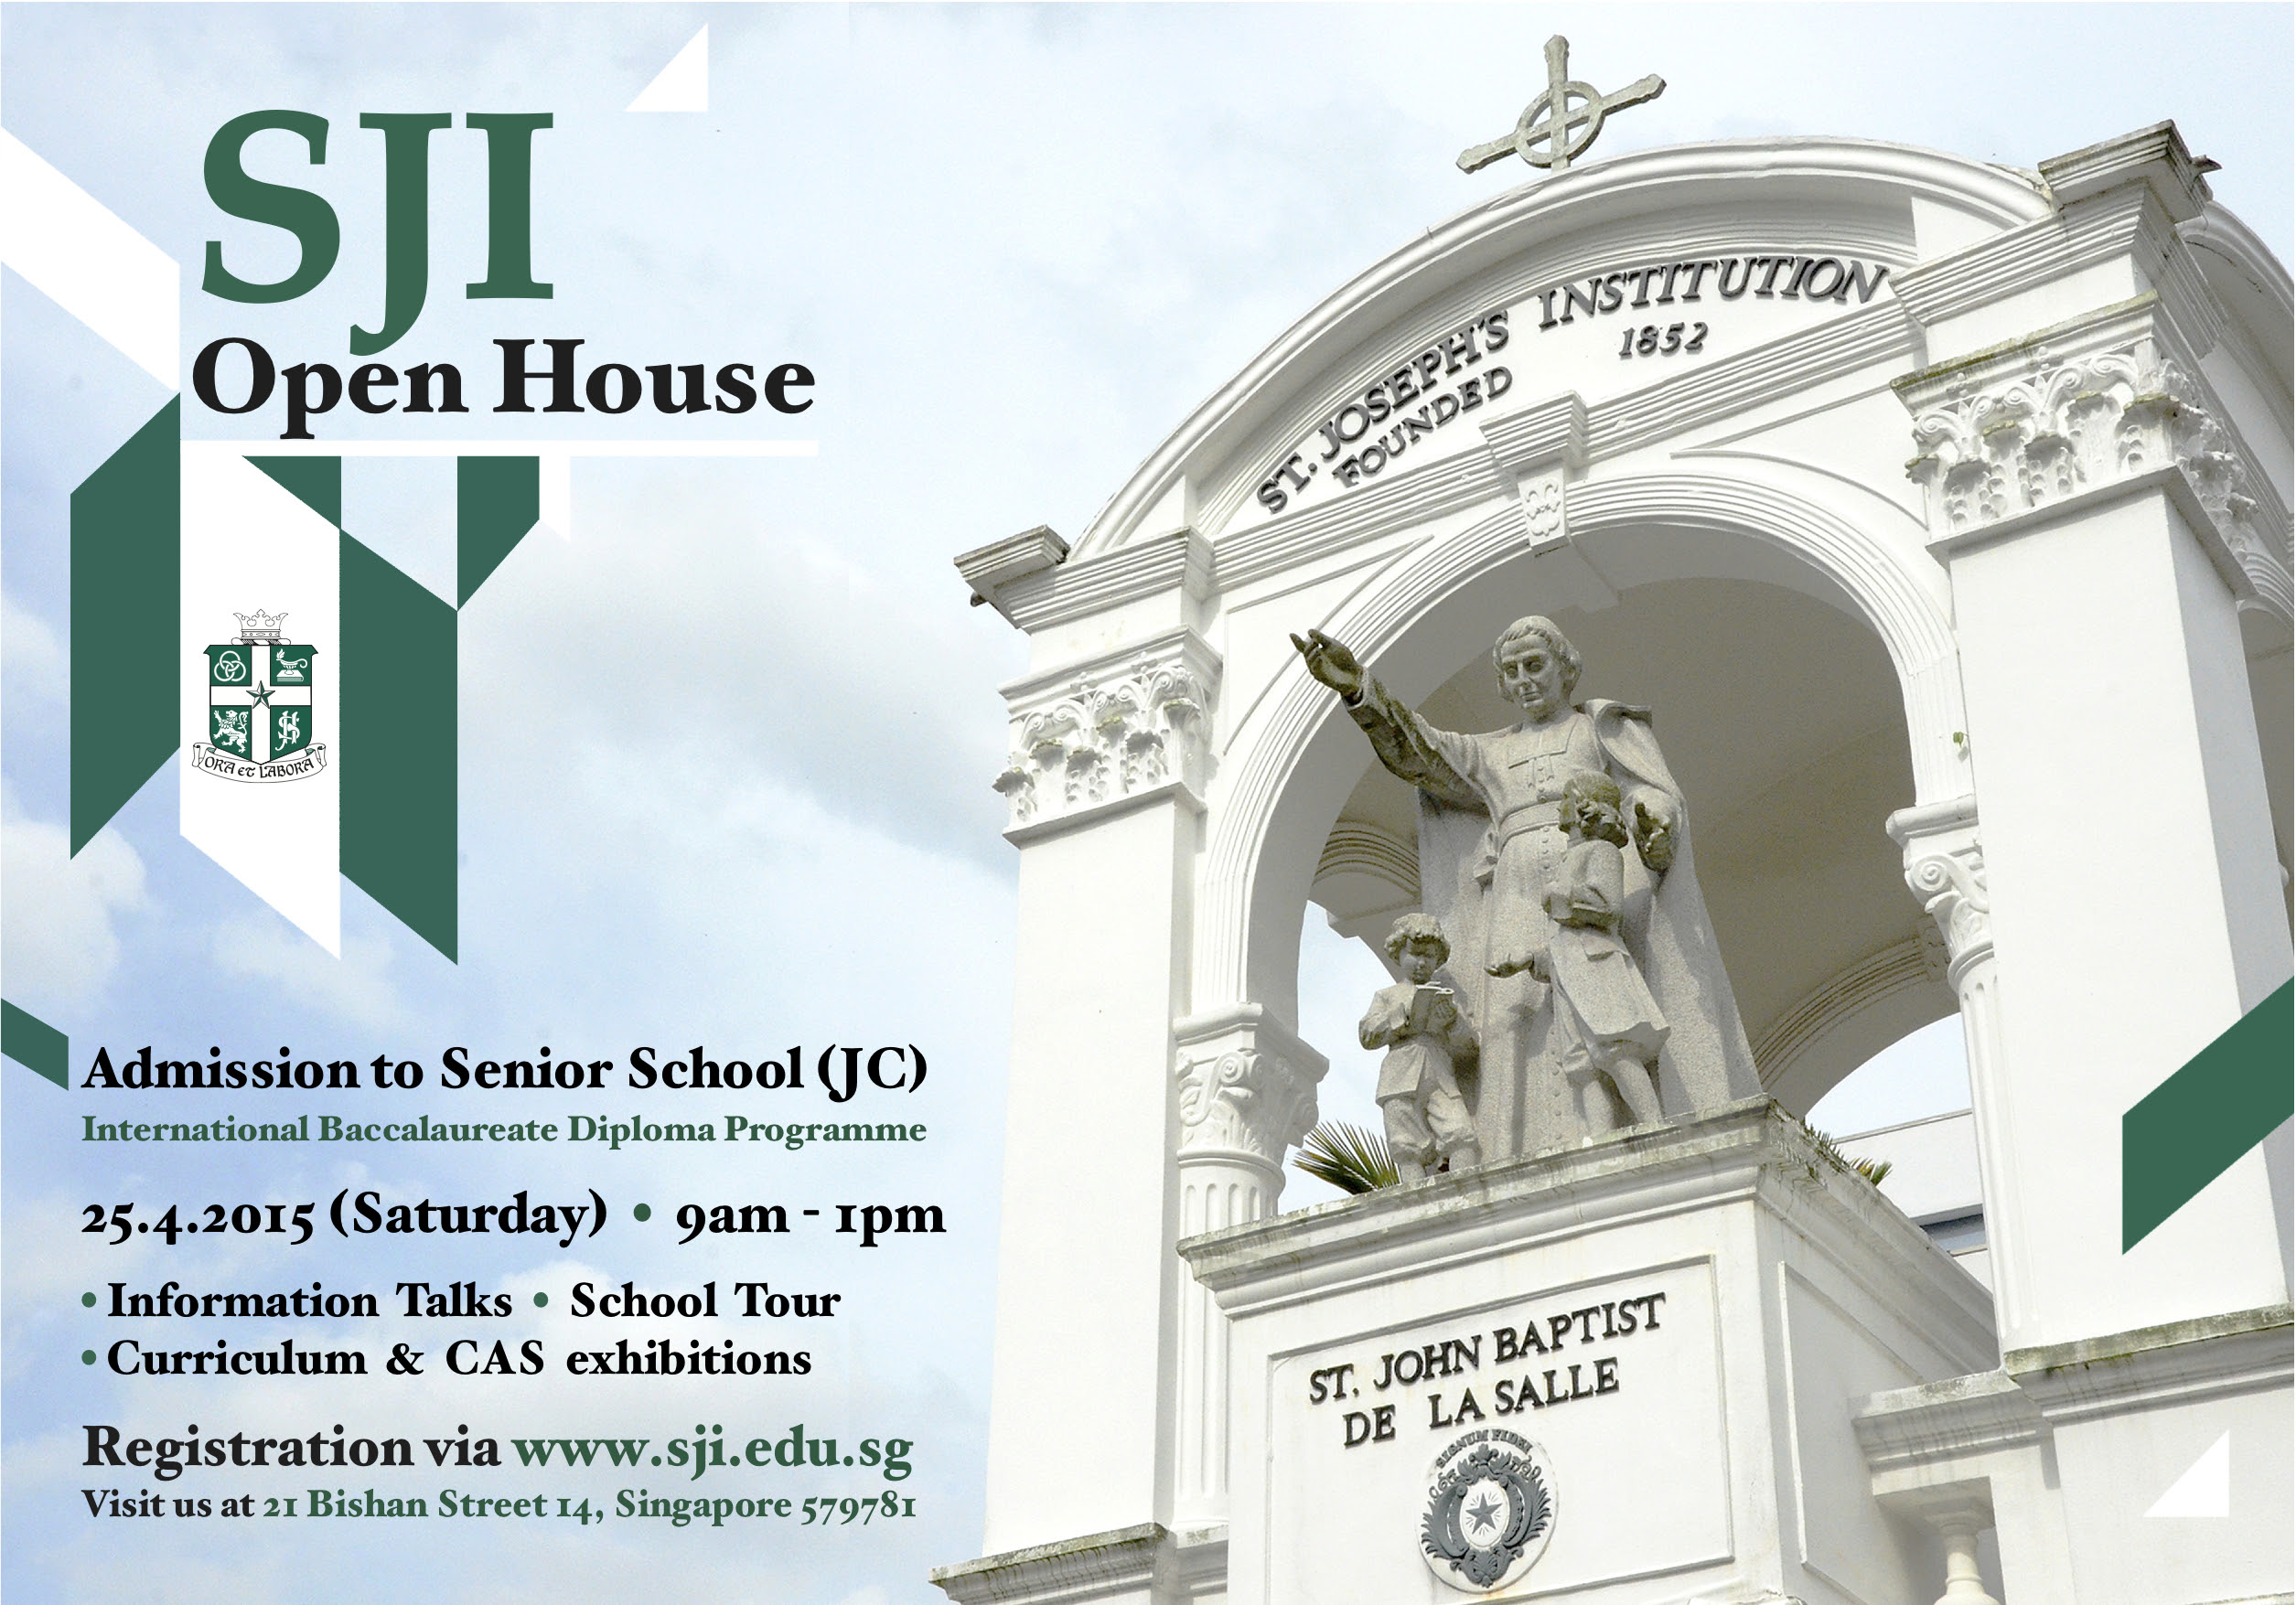 SST Students Blog : [Education and Career Guidance] SJI Open House 2015